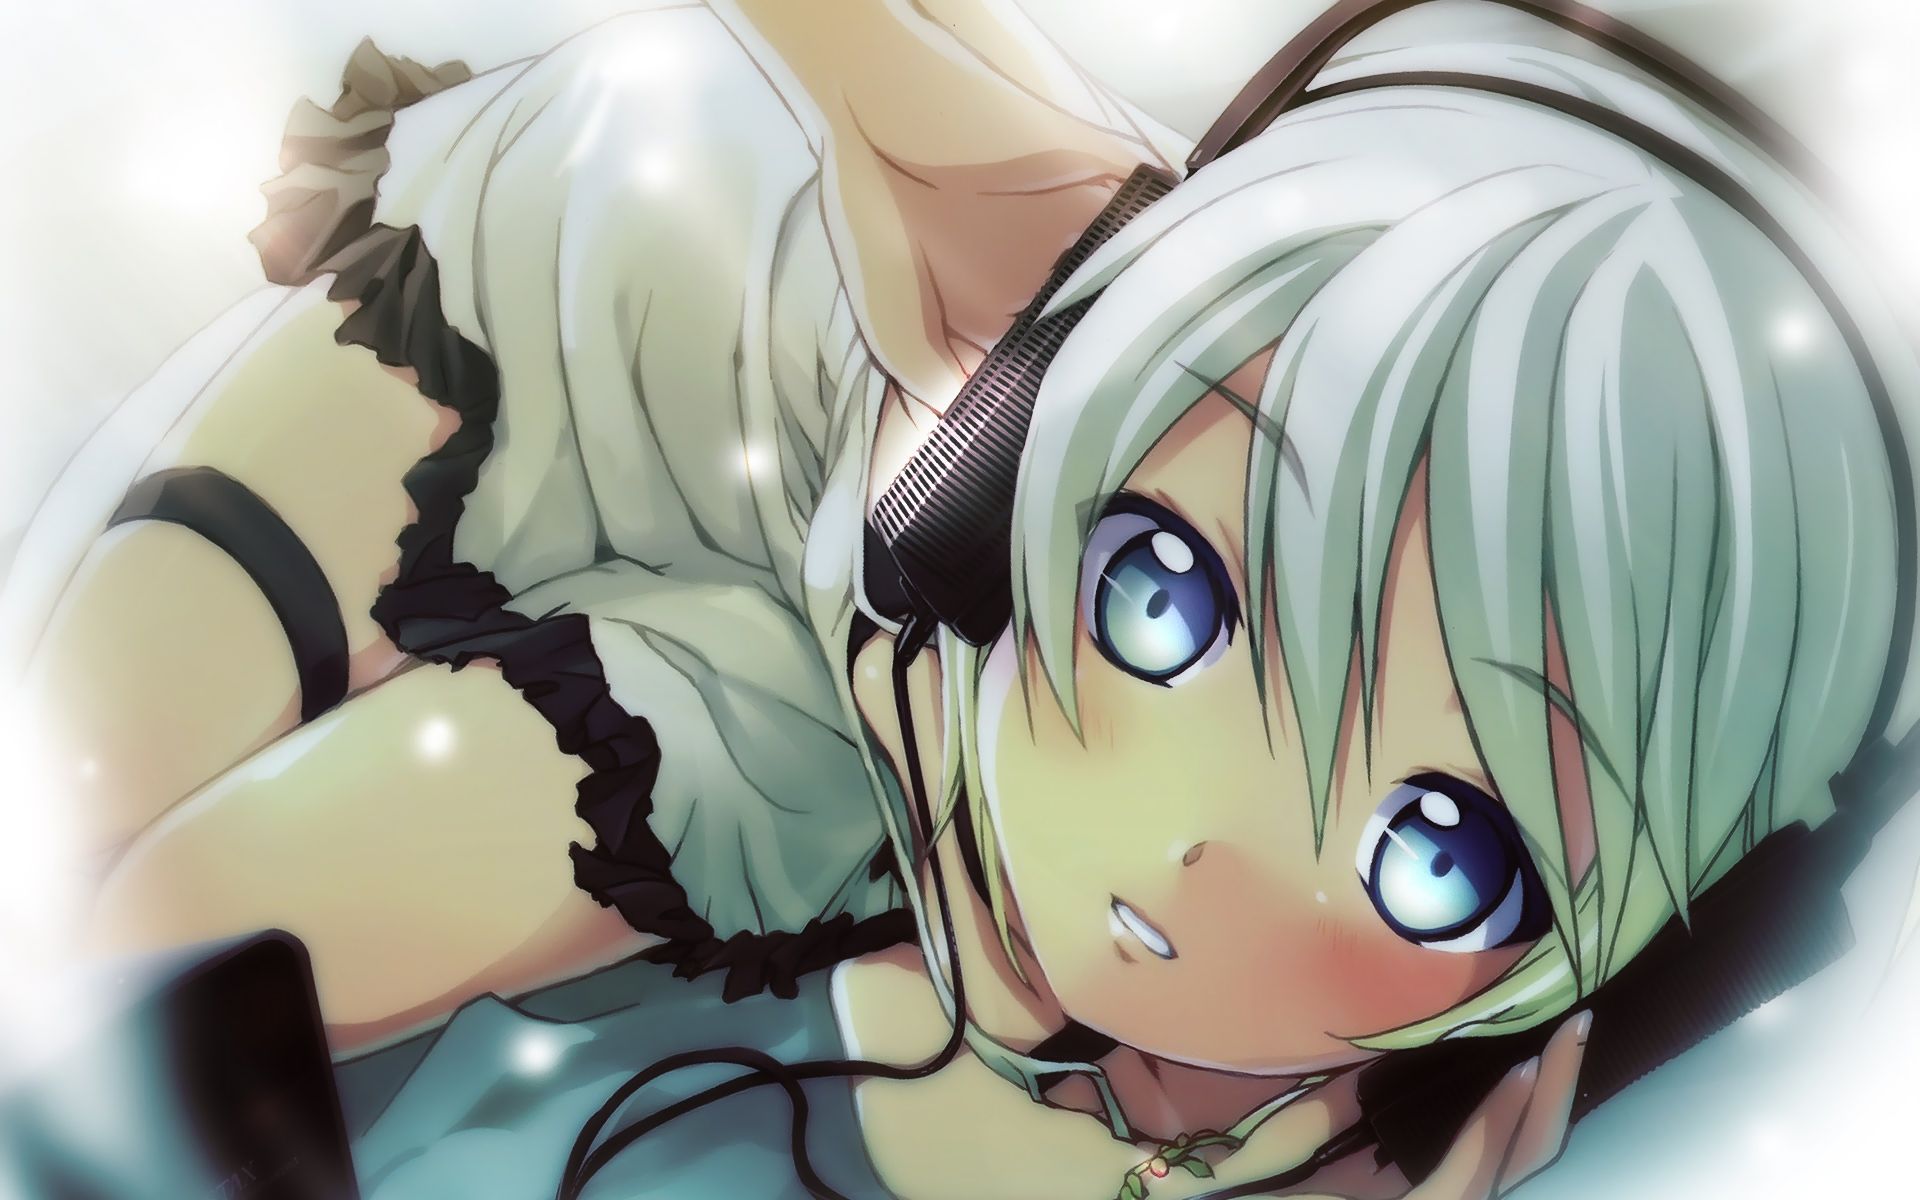 Drew trap picture or headphone girl えろあ. Vol.6 27